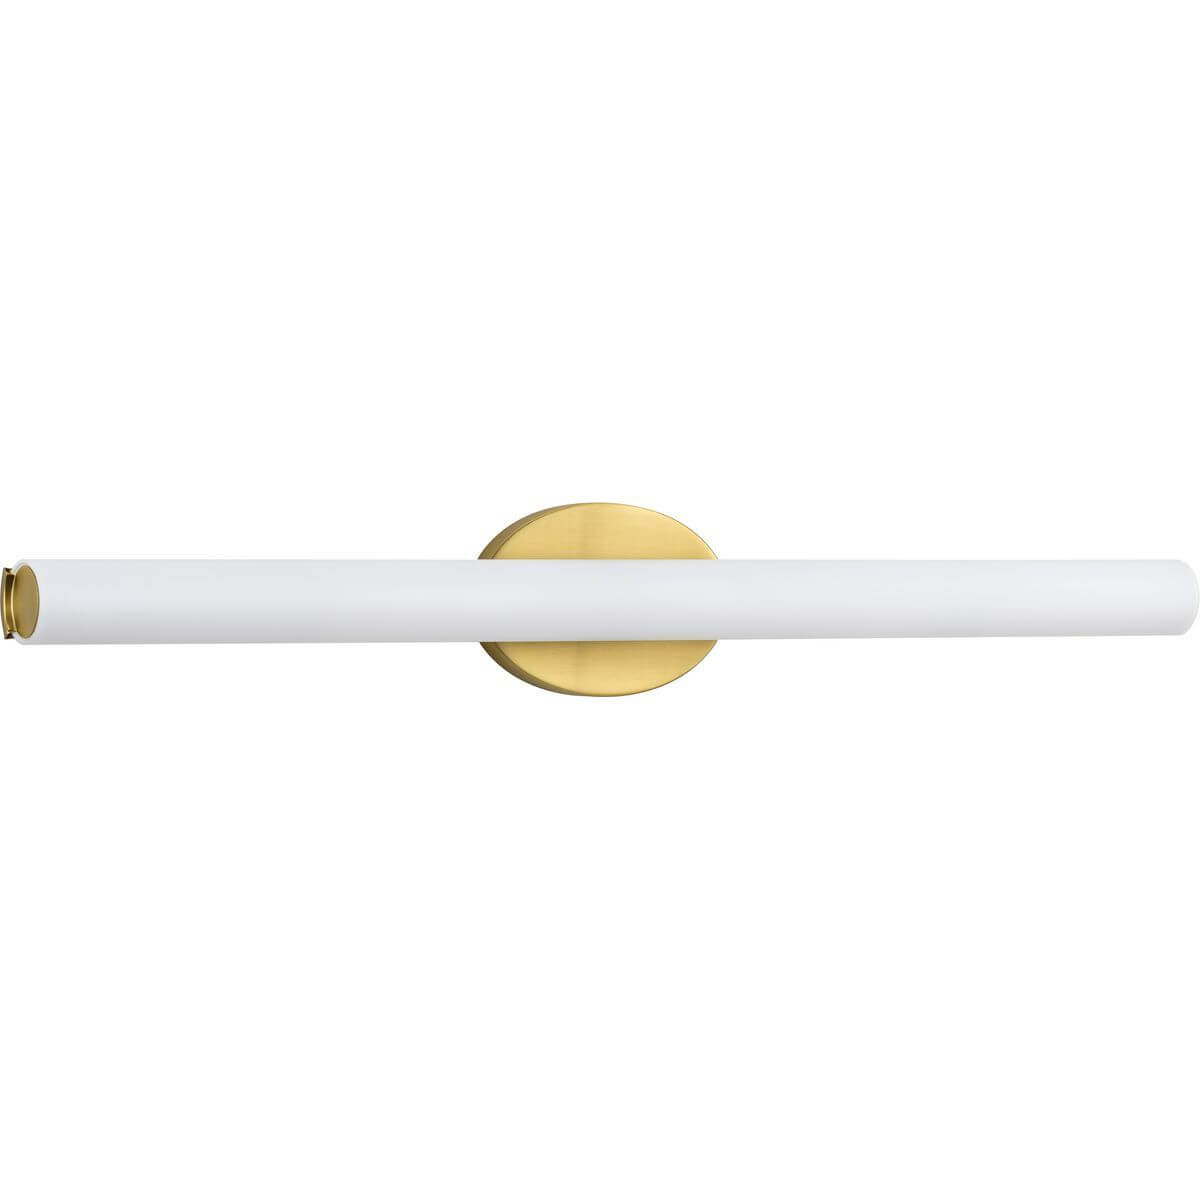 Progress Lighting Parallel 32 inch LED Bath Vanity Light in Satin Brass with Etched White Glass Shade P300184-012-30